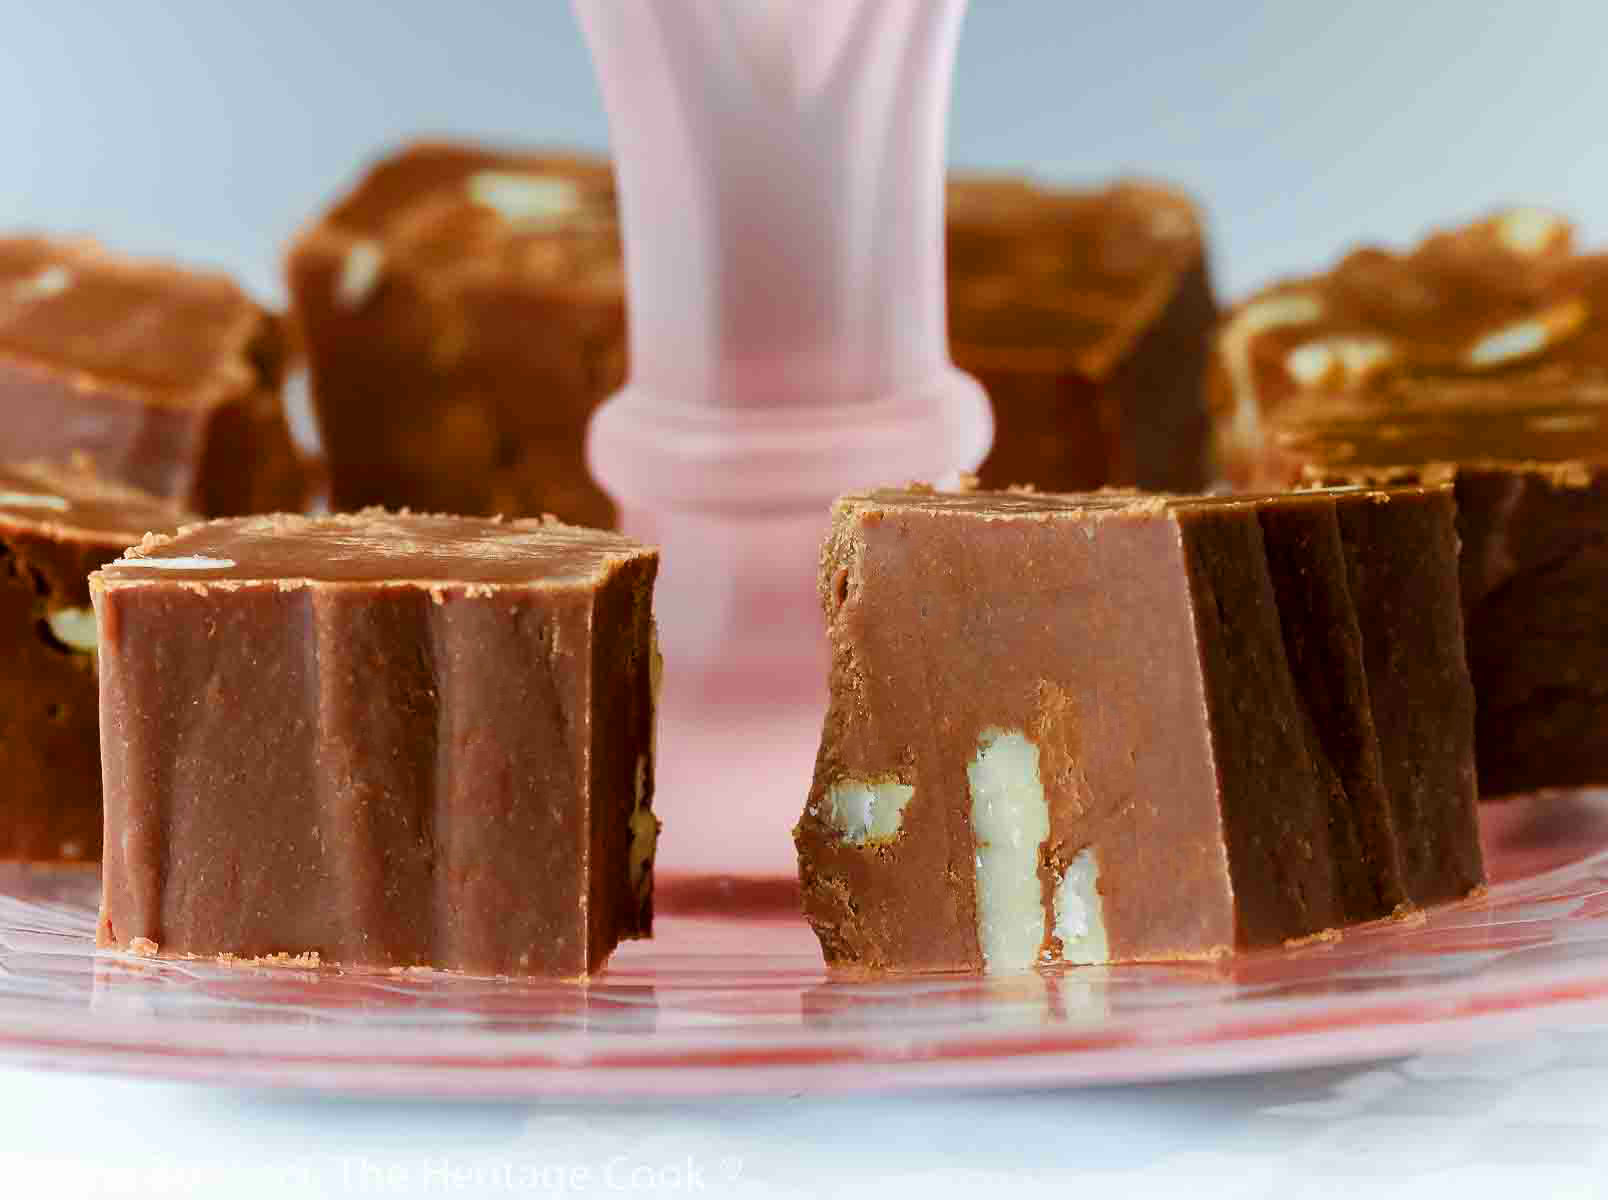 Squares of the World's Easiest Fudge; Collection of the Top 10 Chocolate Recipes from 2023 on The Heritage Cook website © 2023 compiled by Jane Bonacci, The Heritage Cook. 